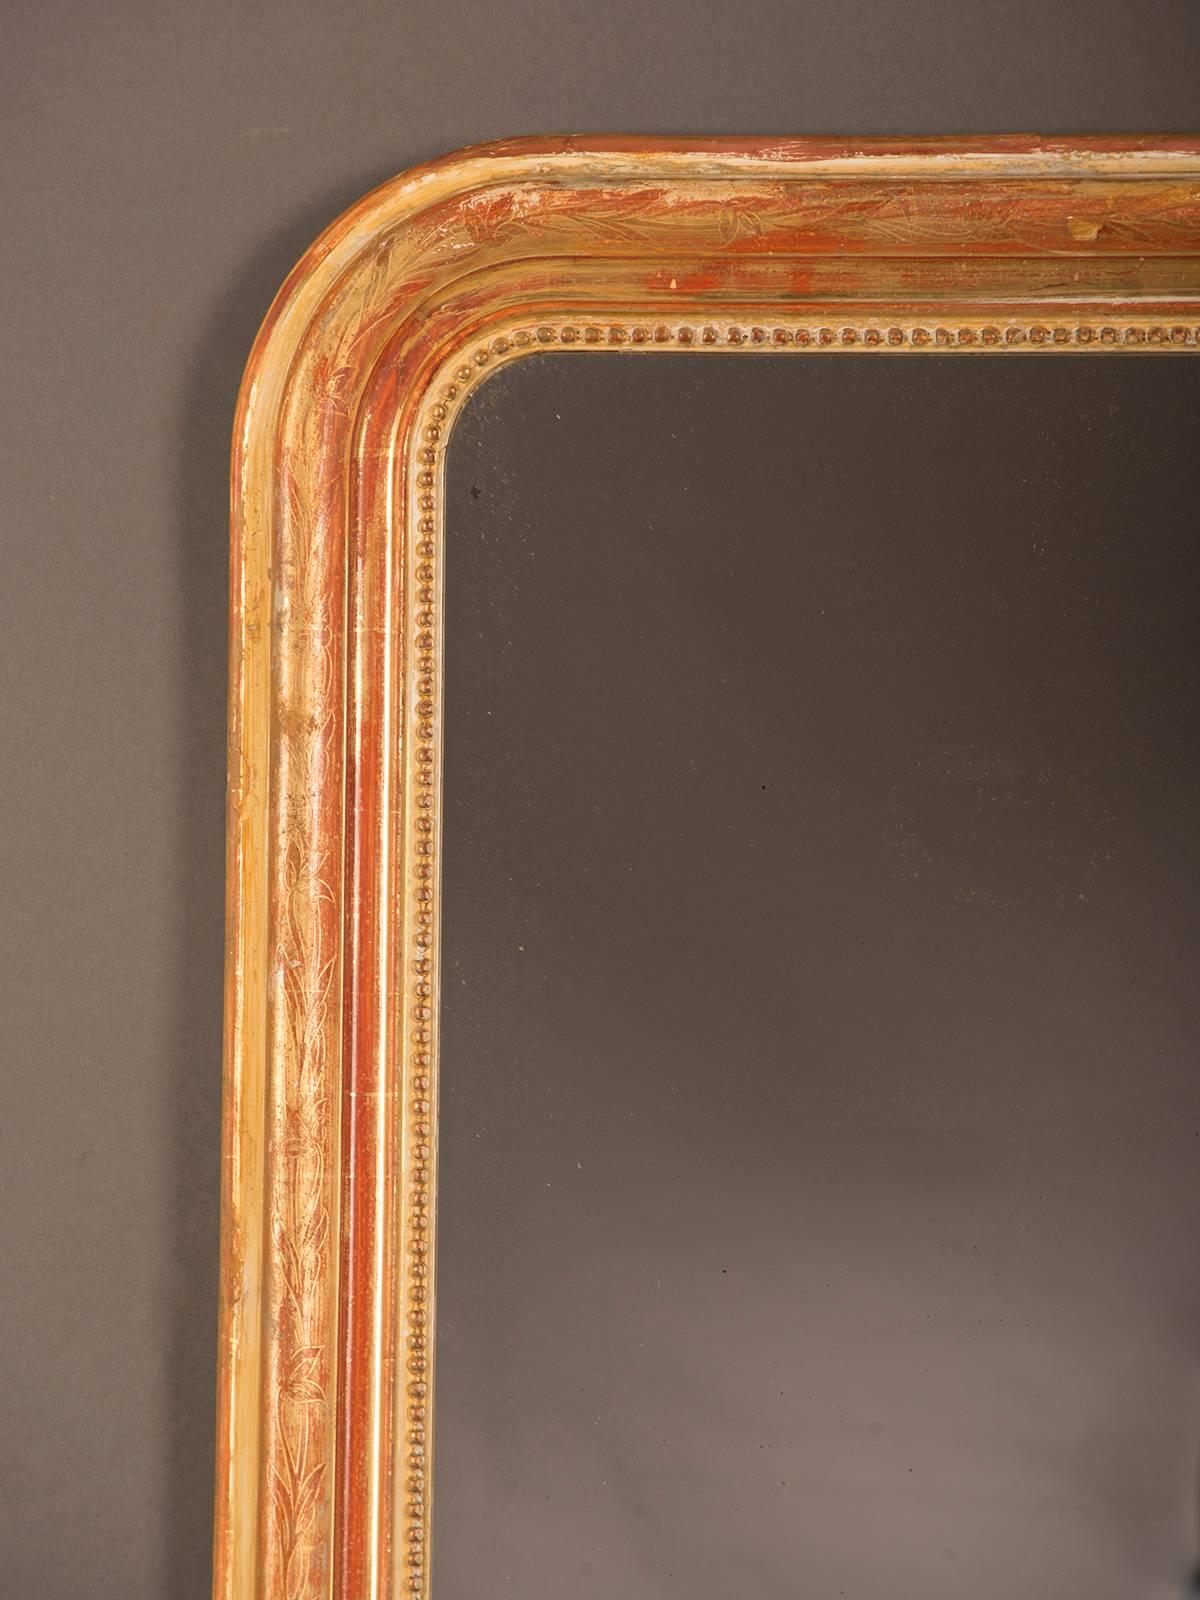 A gorgeous Louis Philippe style antique French gold leaf frame surrounding the original mirror glass circa 1880. Please note both the beautiful proportion of width to height as well as the exceptional beauty of the original gold leaf that has worn